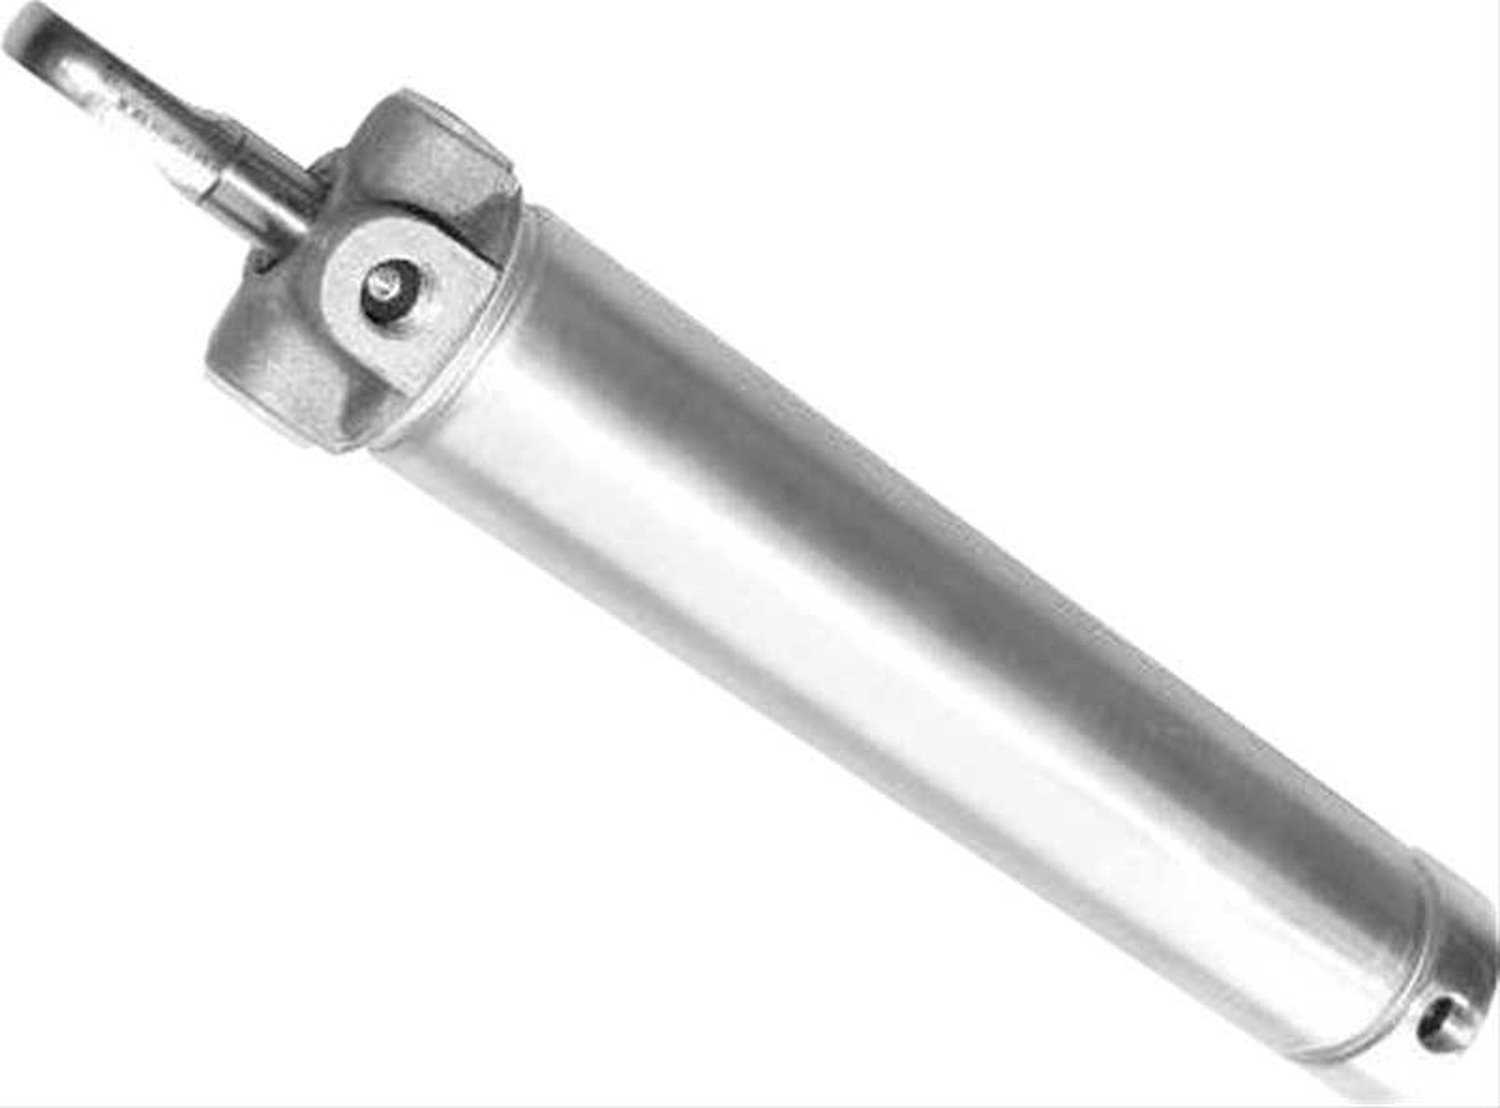 MD2198 Convertible Top Hydraulic Cylinder 1966-70 Chrysler, Plymouth, Dodge A, B, C-Body; Each